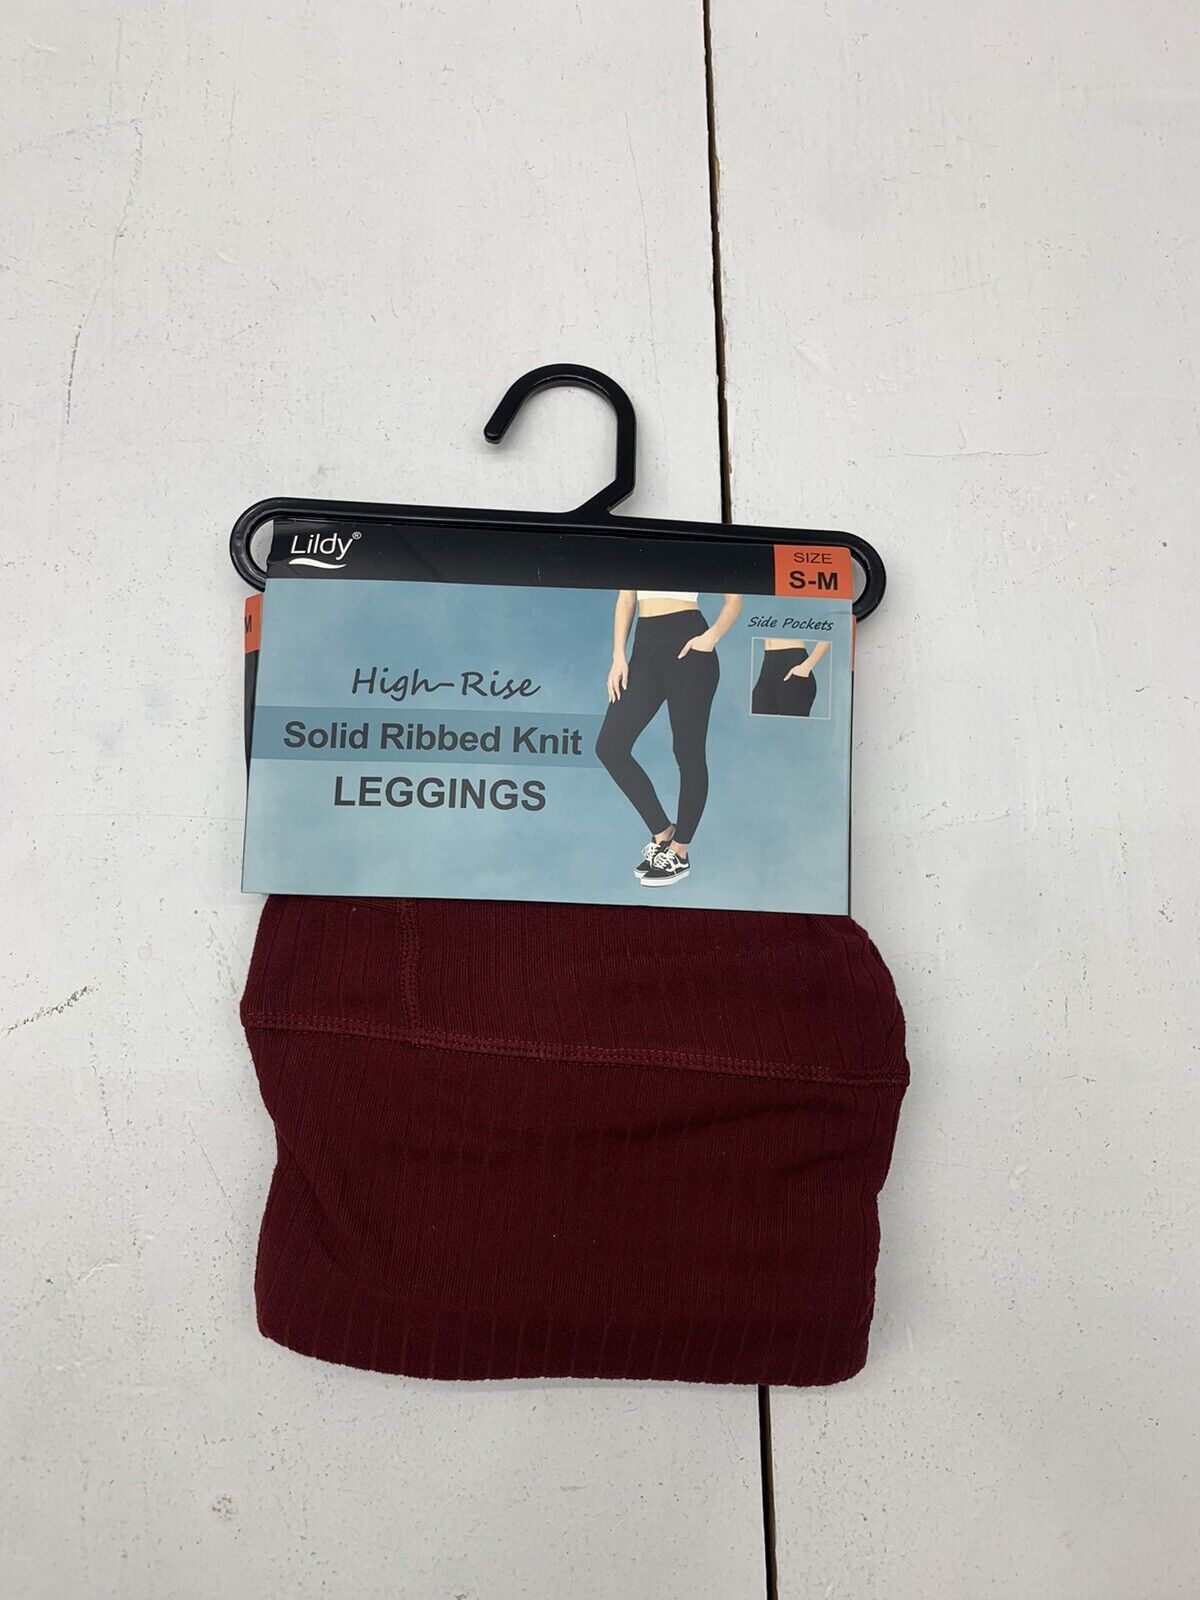 NEW Lildy High-Rise Solid Ribbed Knit Red Leggings Size S-M